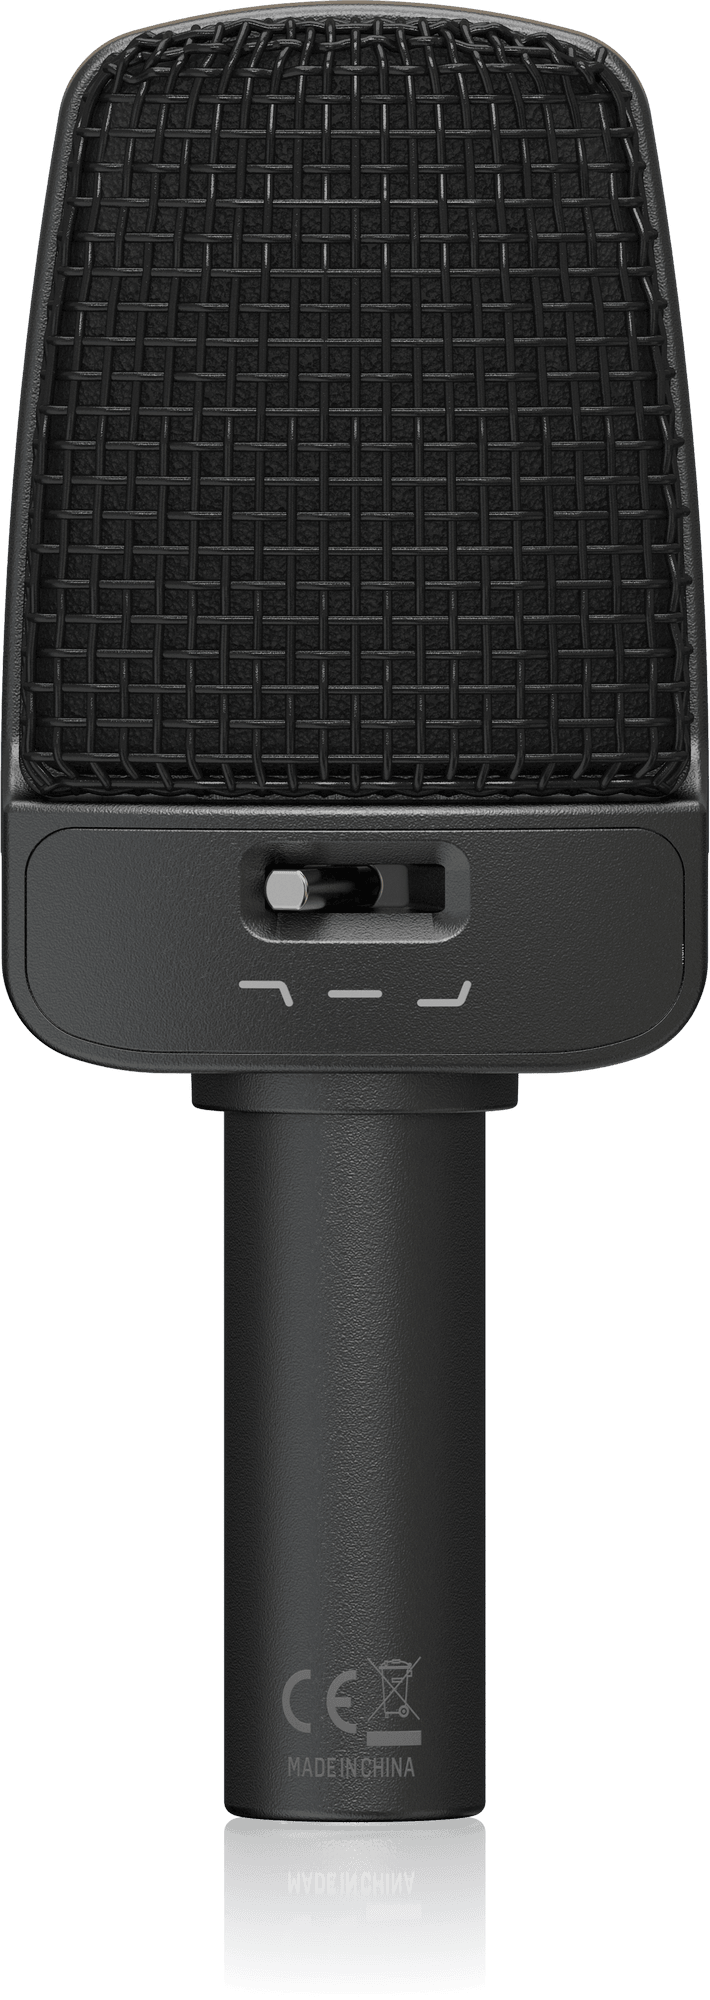 Behringer B906 Dynamic Microphone for Instrument and Vocal Applications (B 906 / B-906)  | BEHRINGER , Zoso Music